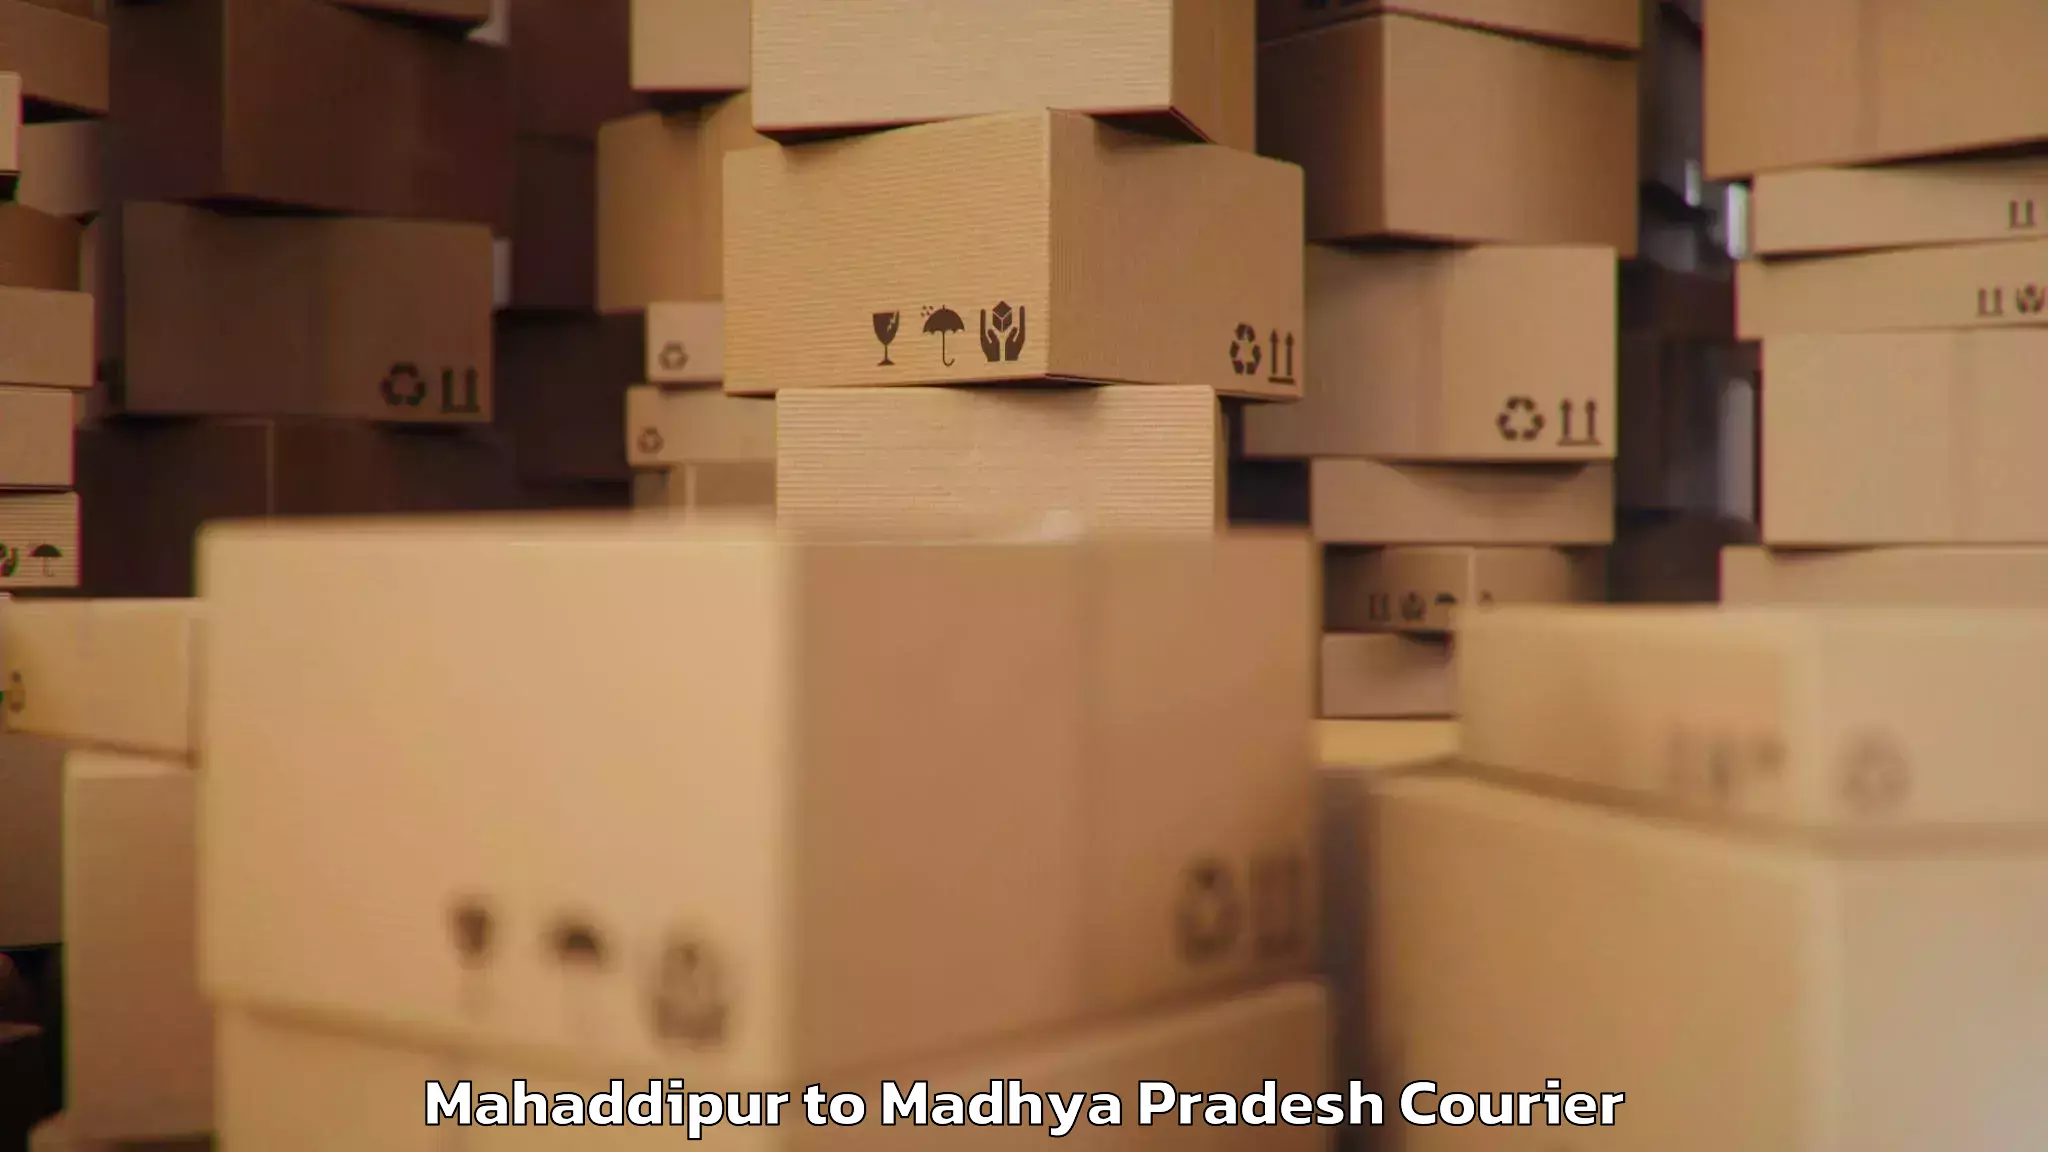 Luggage transfer service in Mahaddipur to Madwas